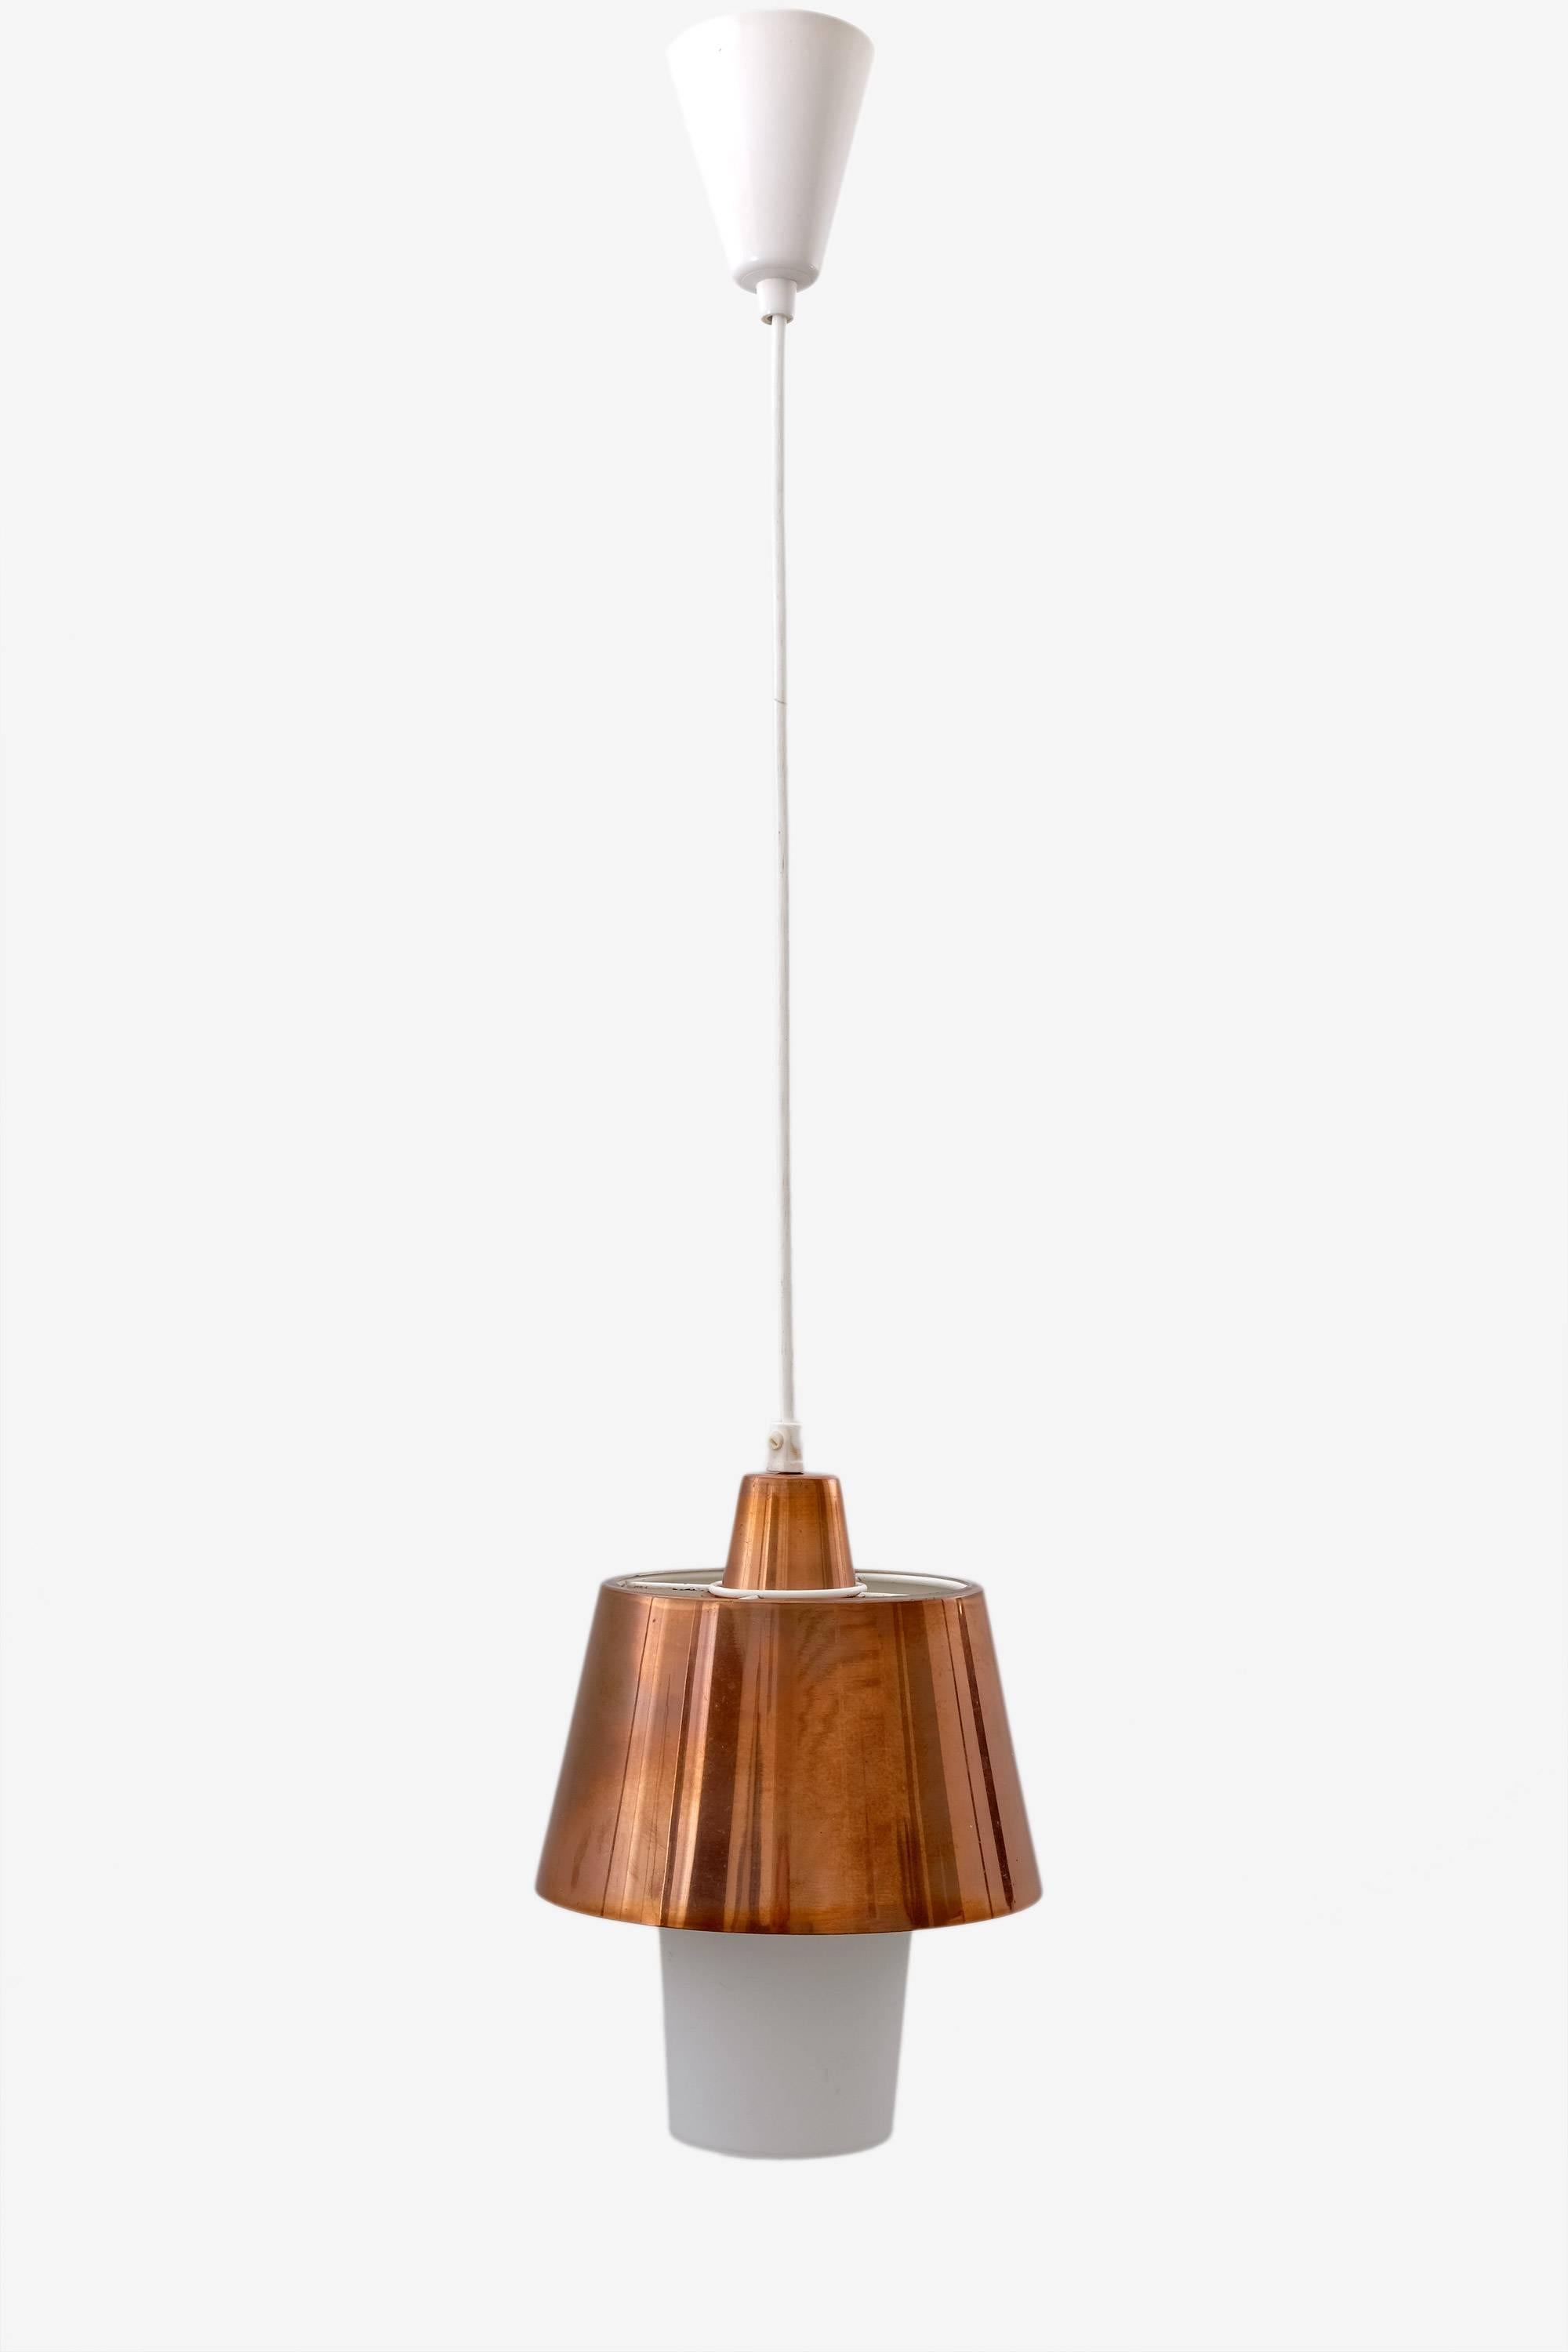 1950s Itsu ceiling lamp model ES 122. Copper shade, frosted inner glass. Manufacturer mark.
